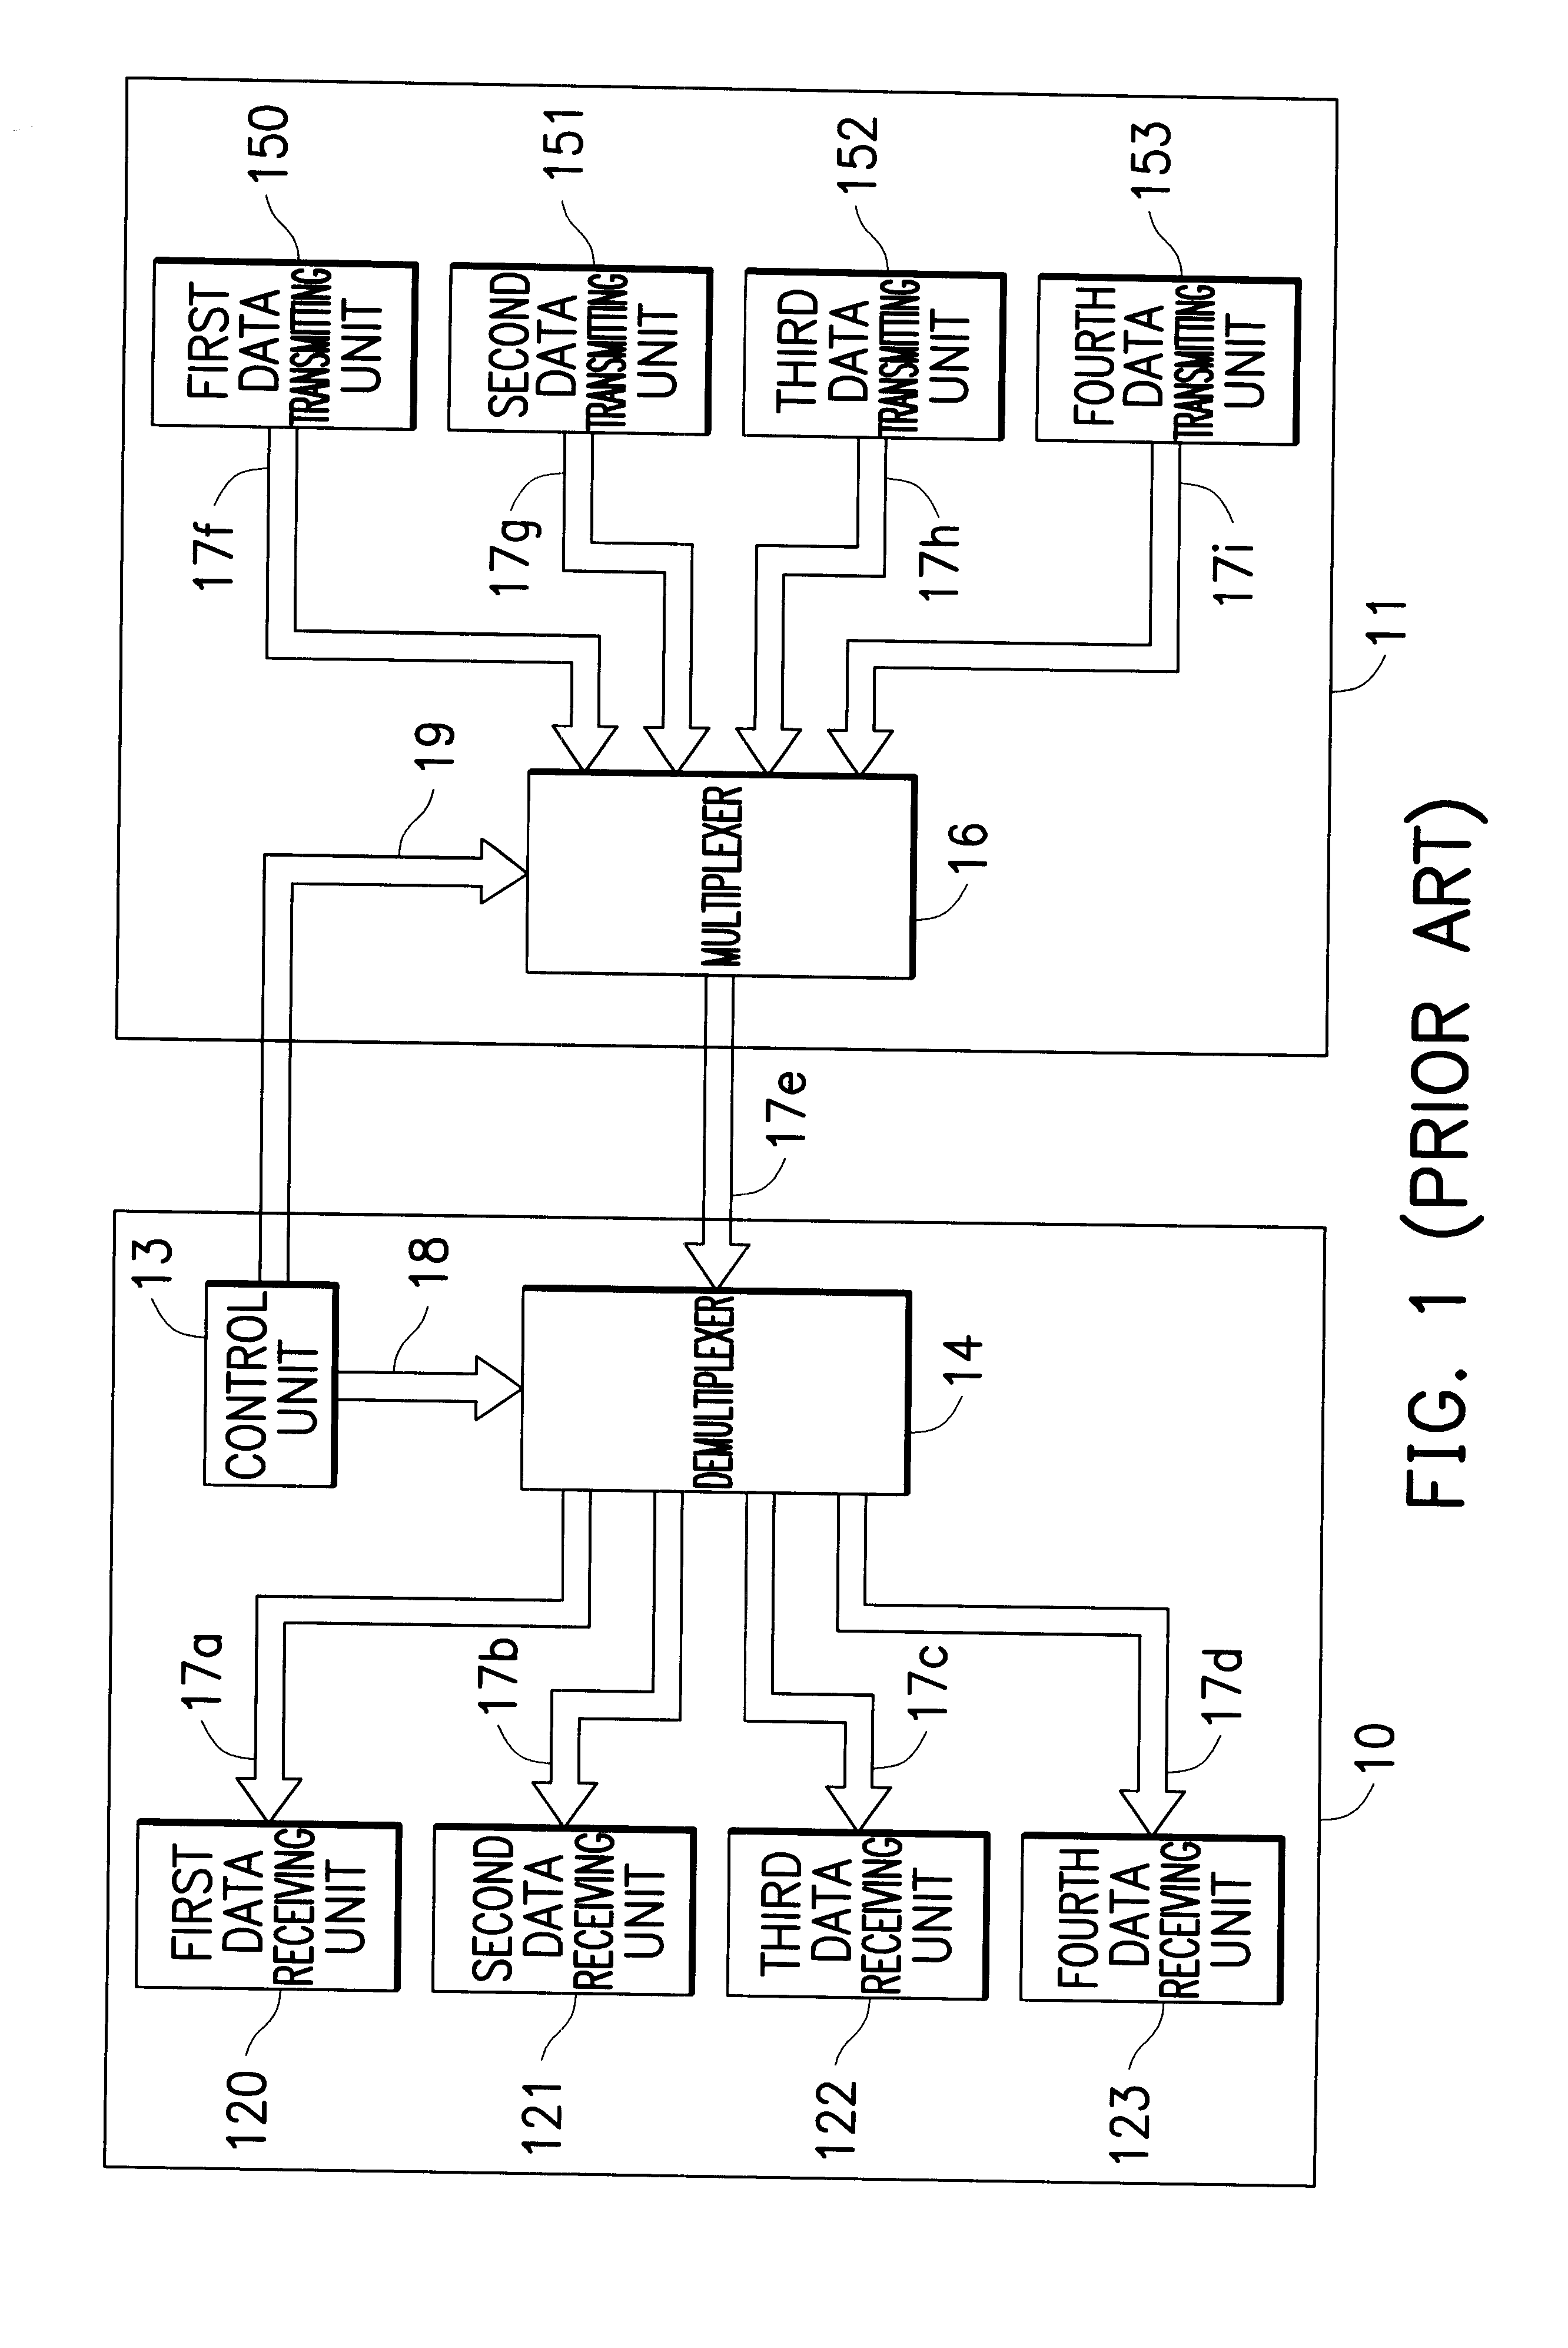 Apparatus and method for serial data communication between plurality of chips in a chip set